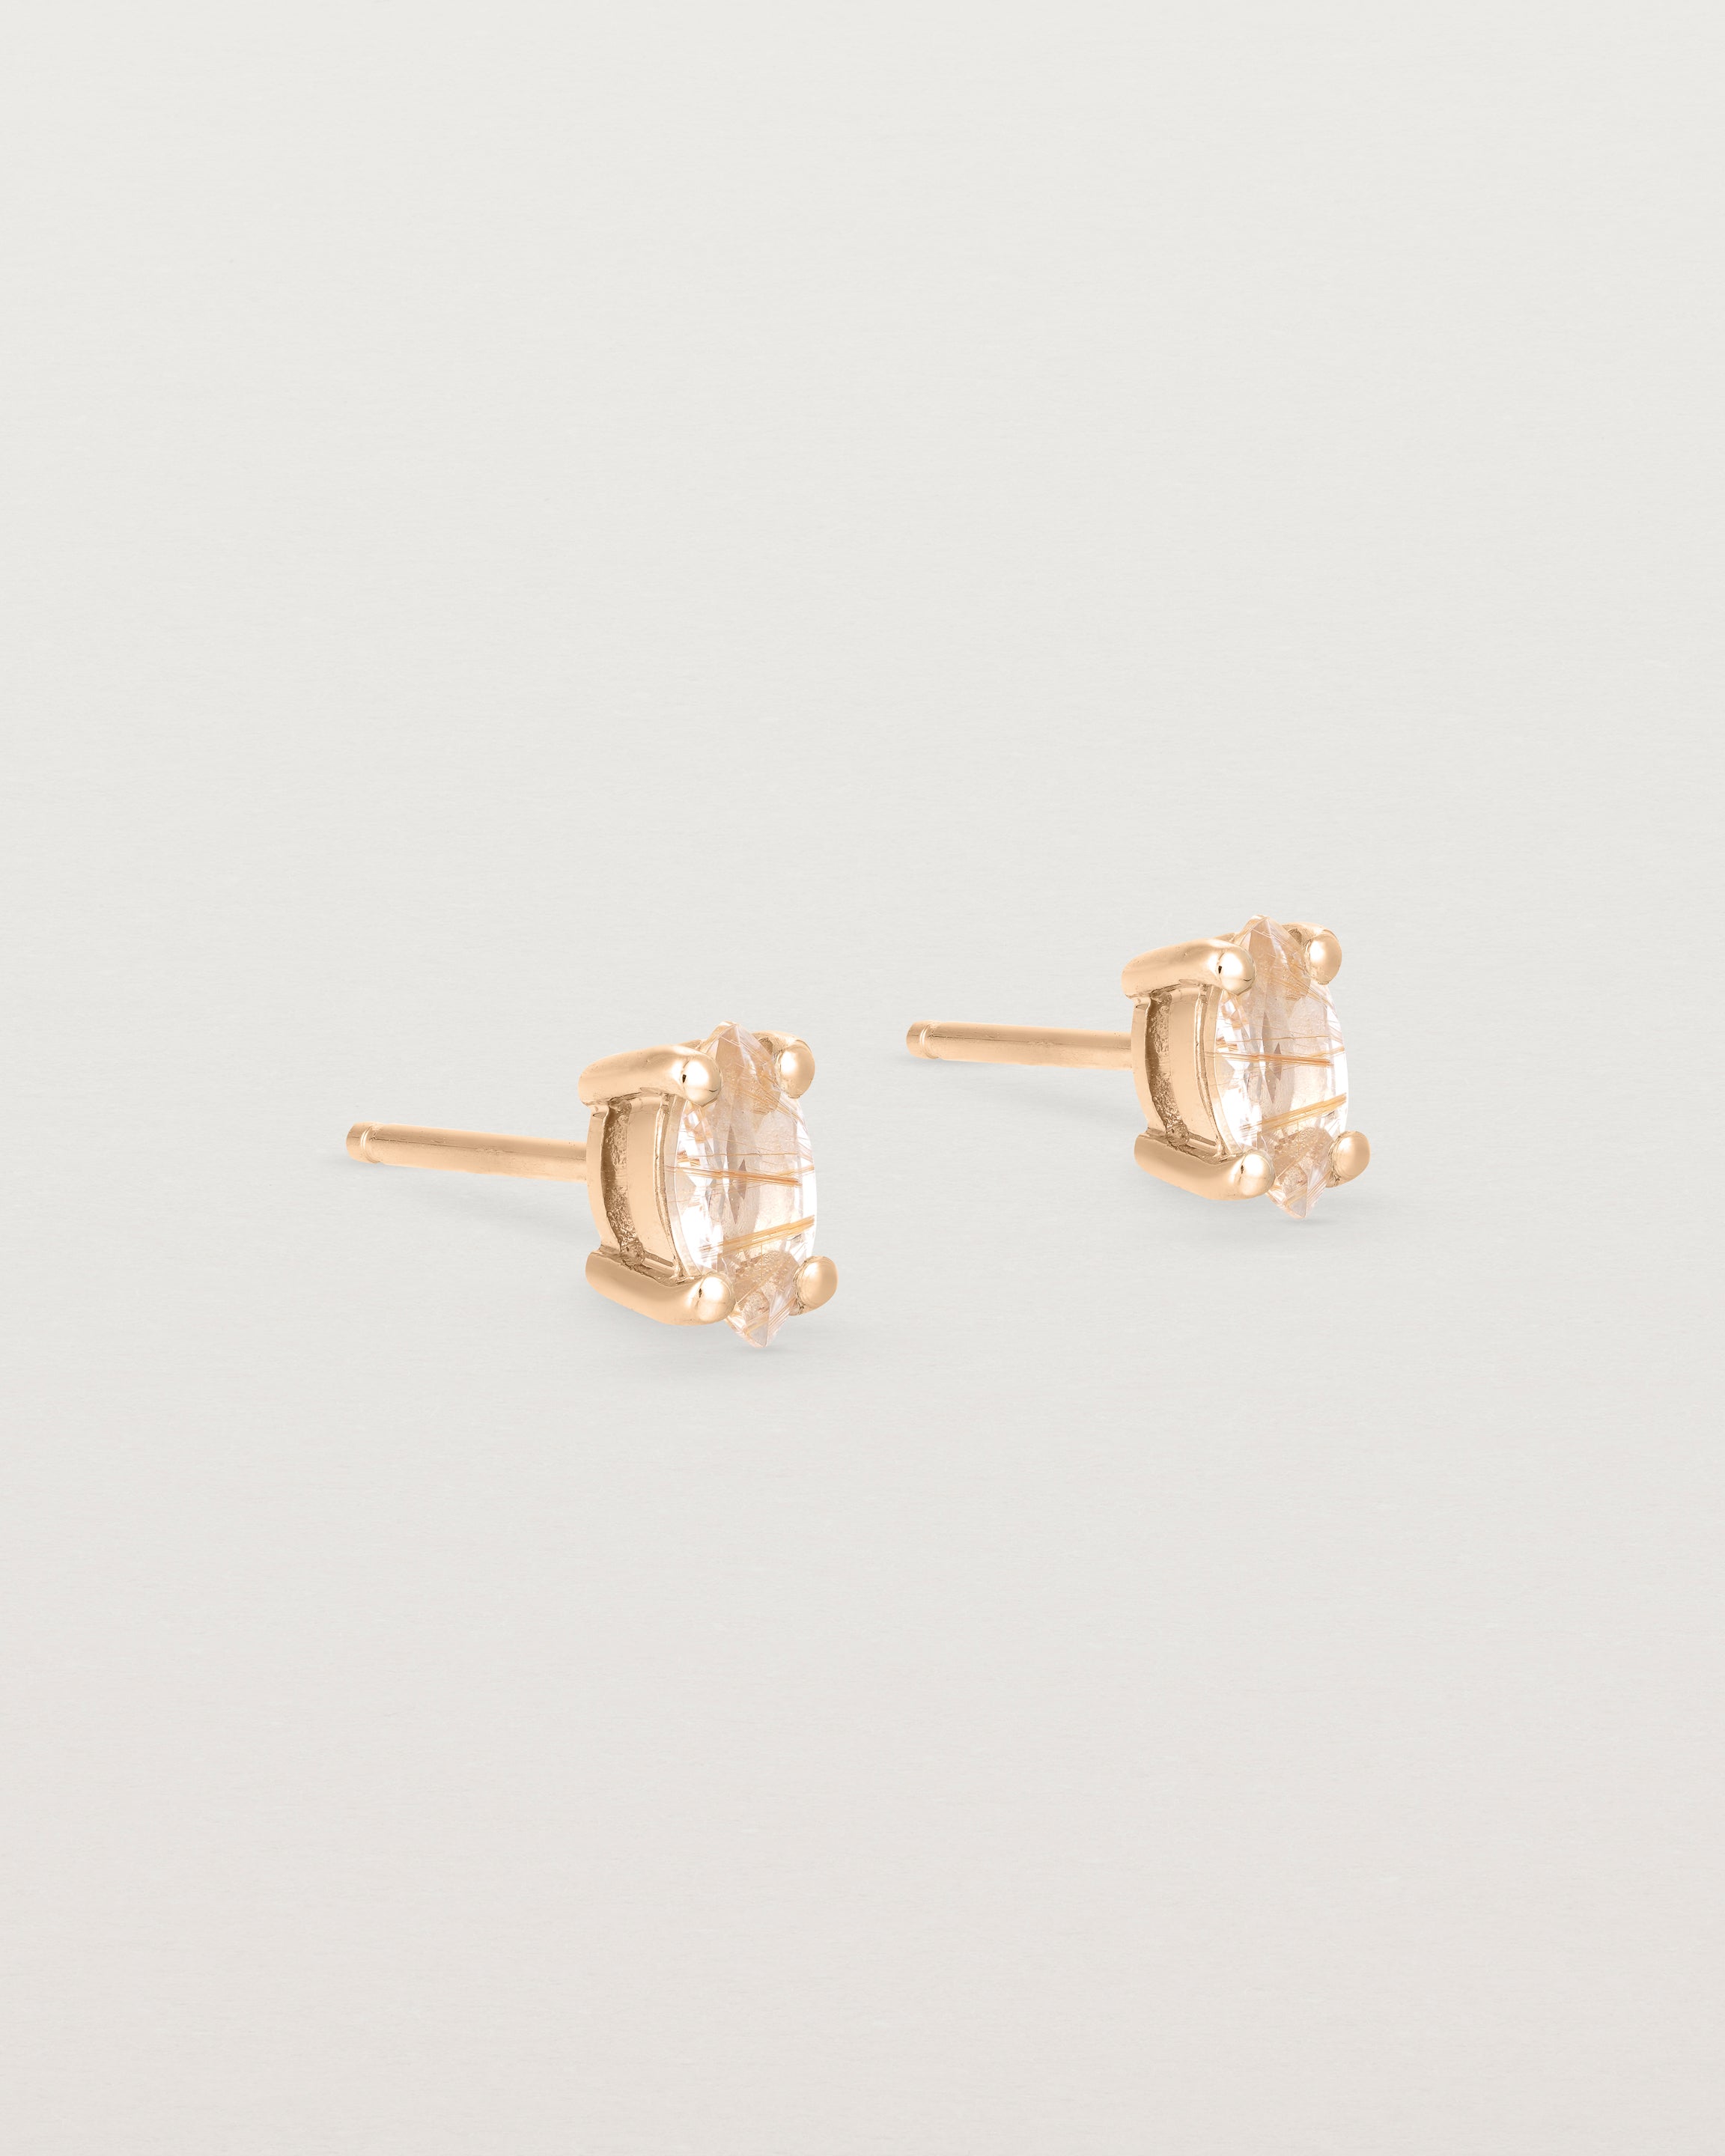 A pair of rose gold studs featuring a marquise shaped light yellow rutilated quartz